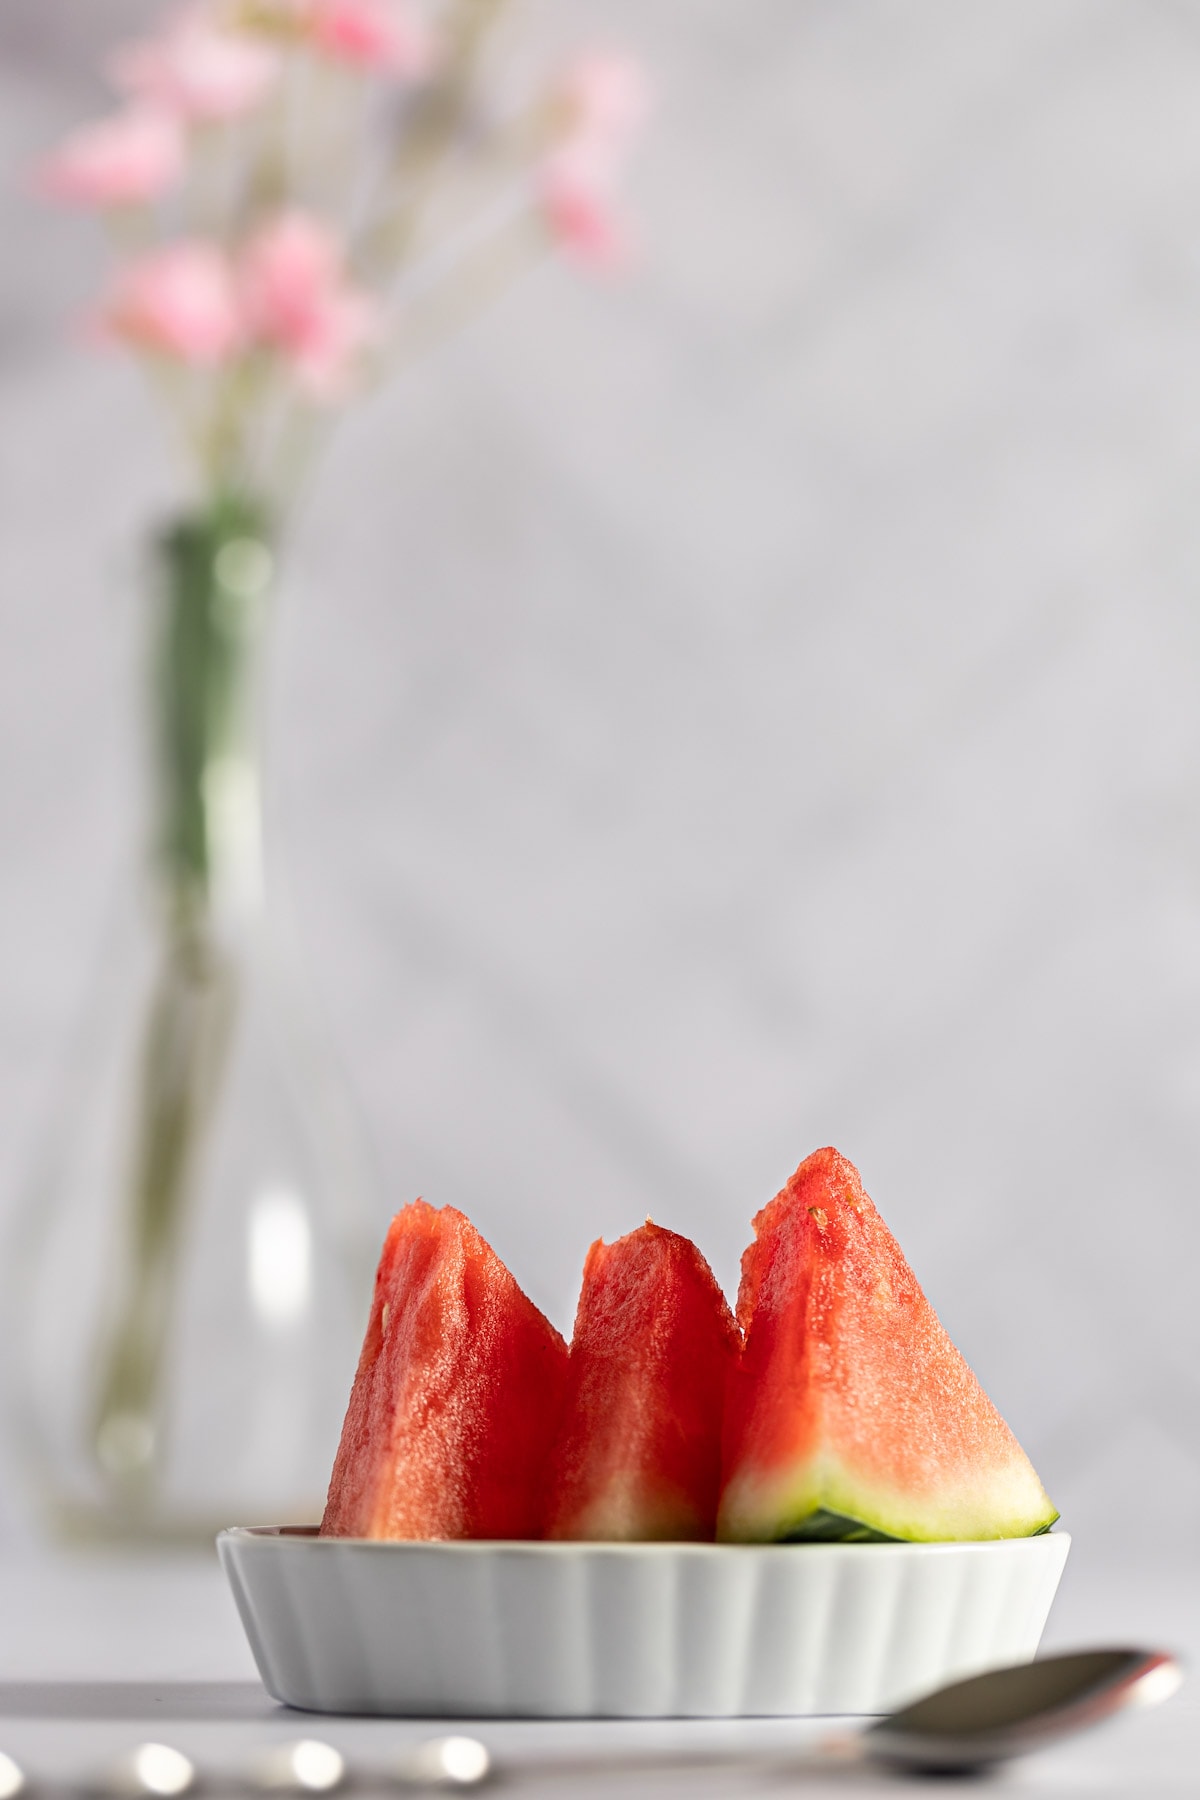 A small, flat white dish holding three mini slices of watermelon, with a vase of flowers in the background.